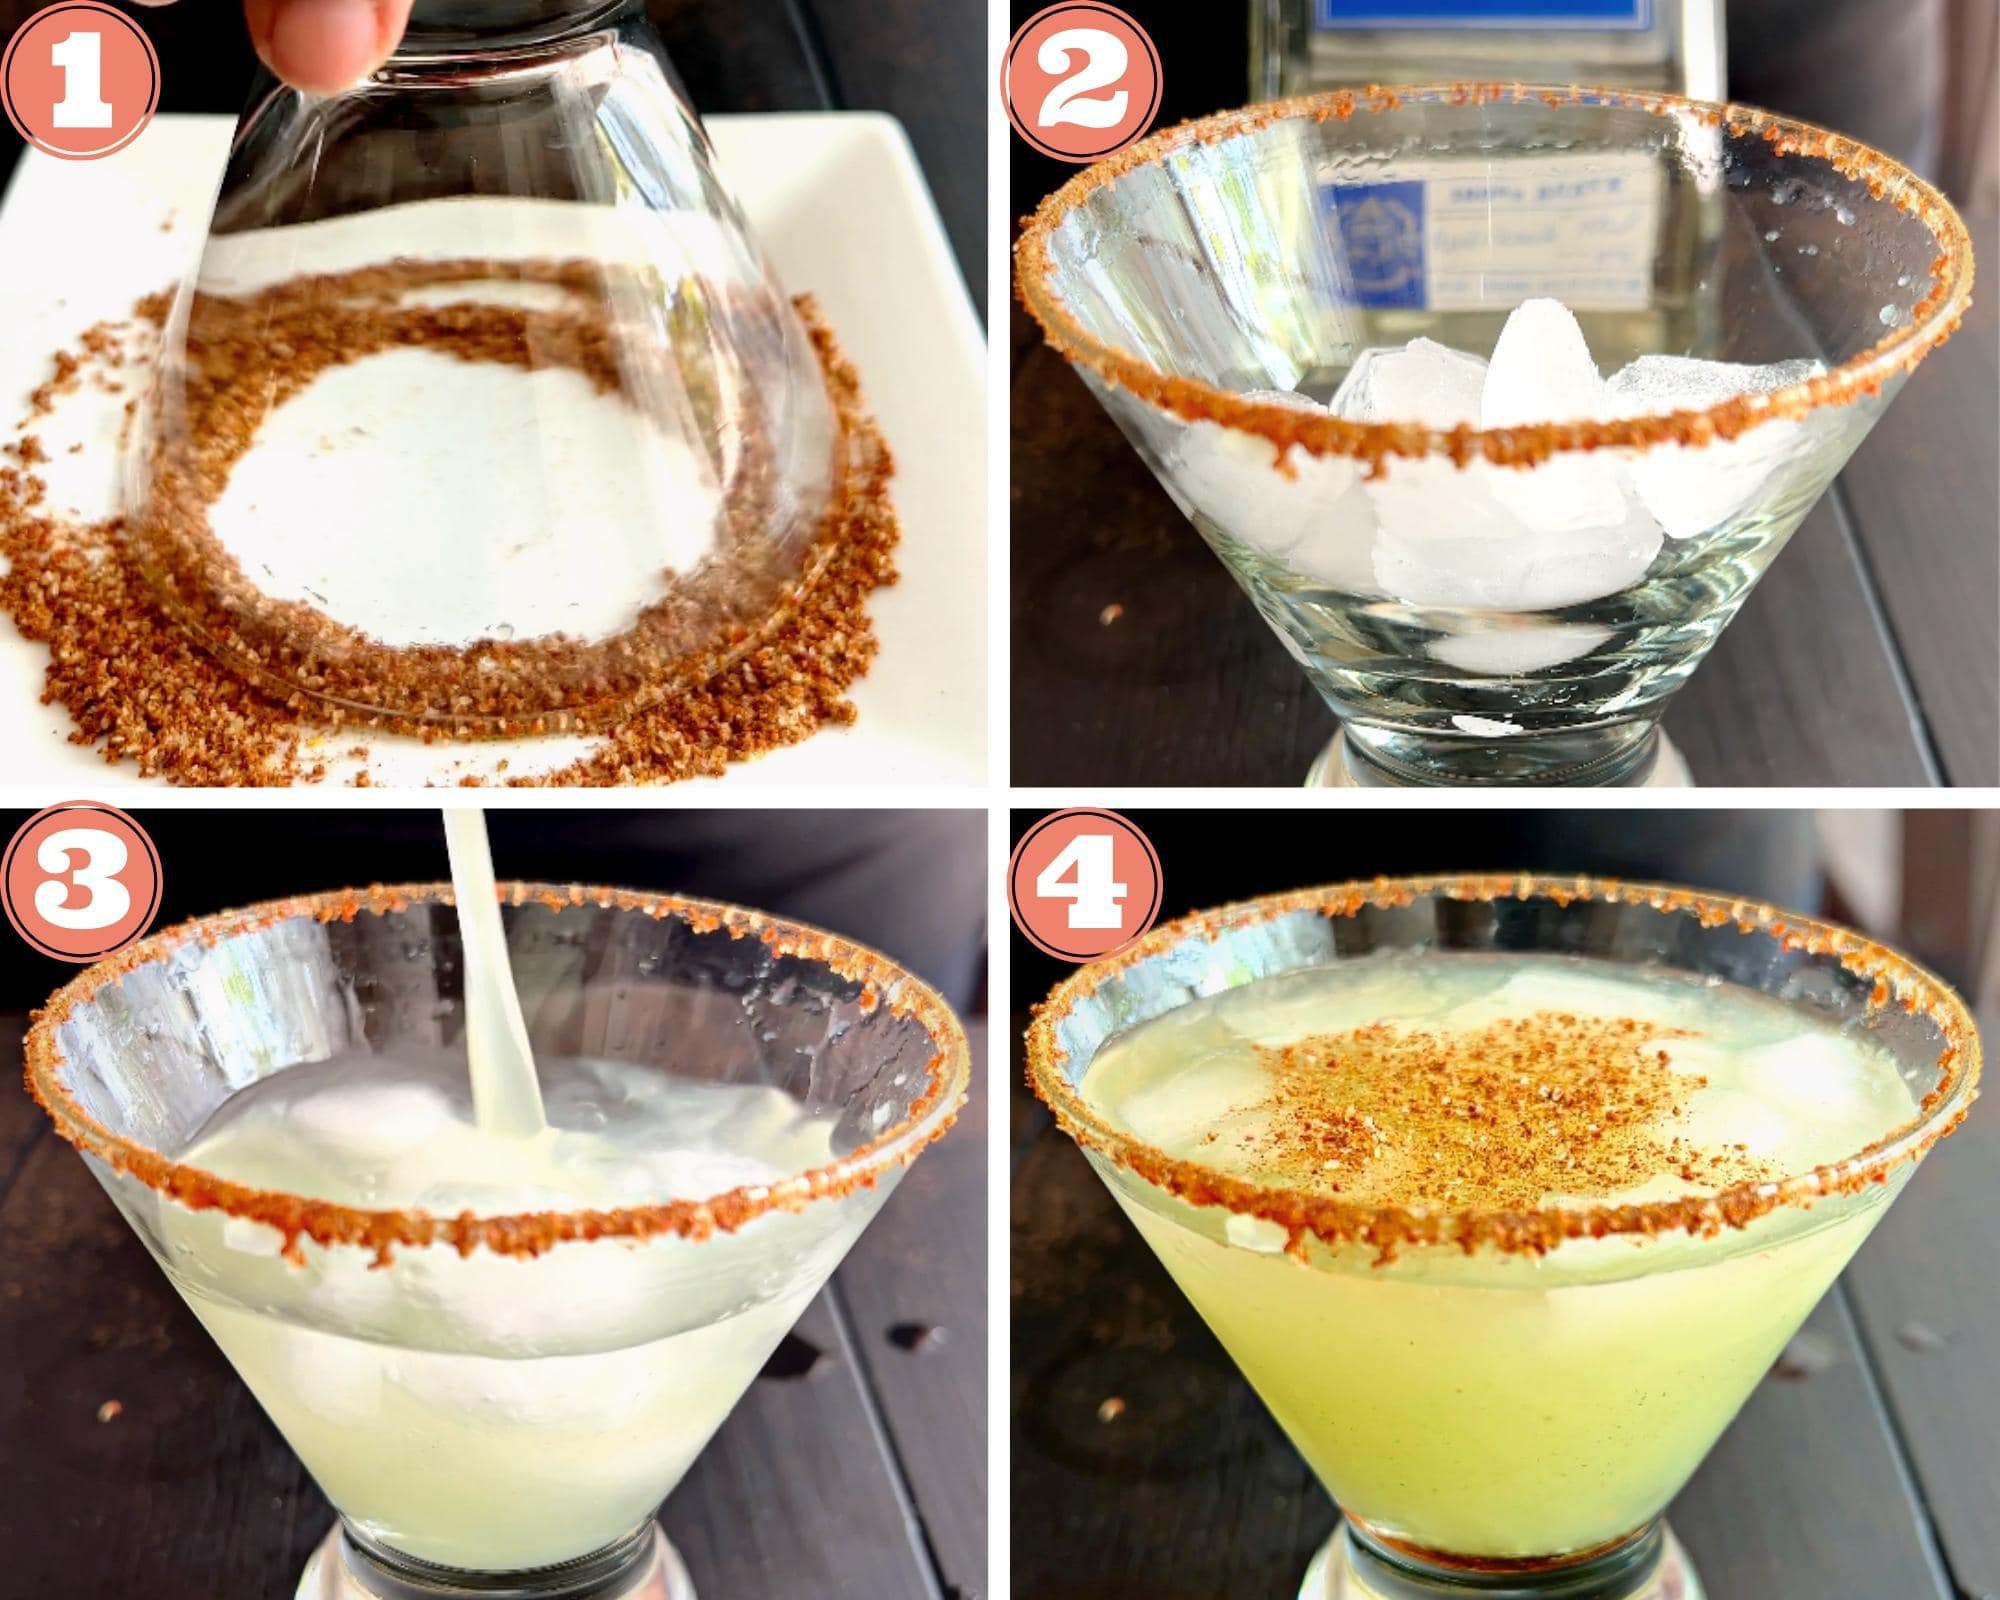 Steps 1-4 showing how to pour ice in glass, top with tequila and juice to make margarita